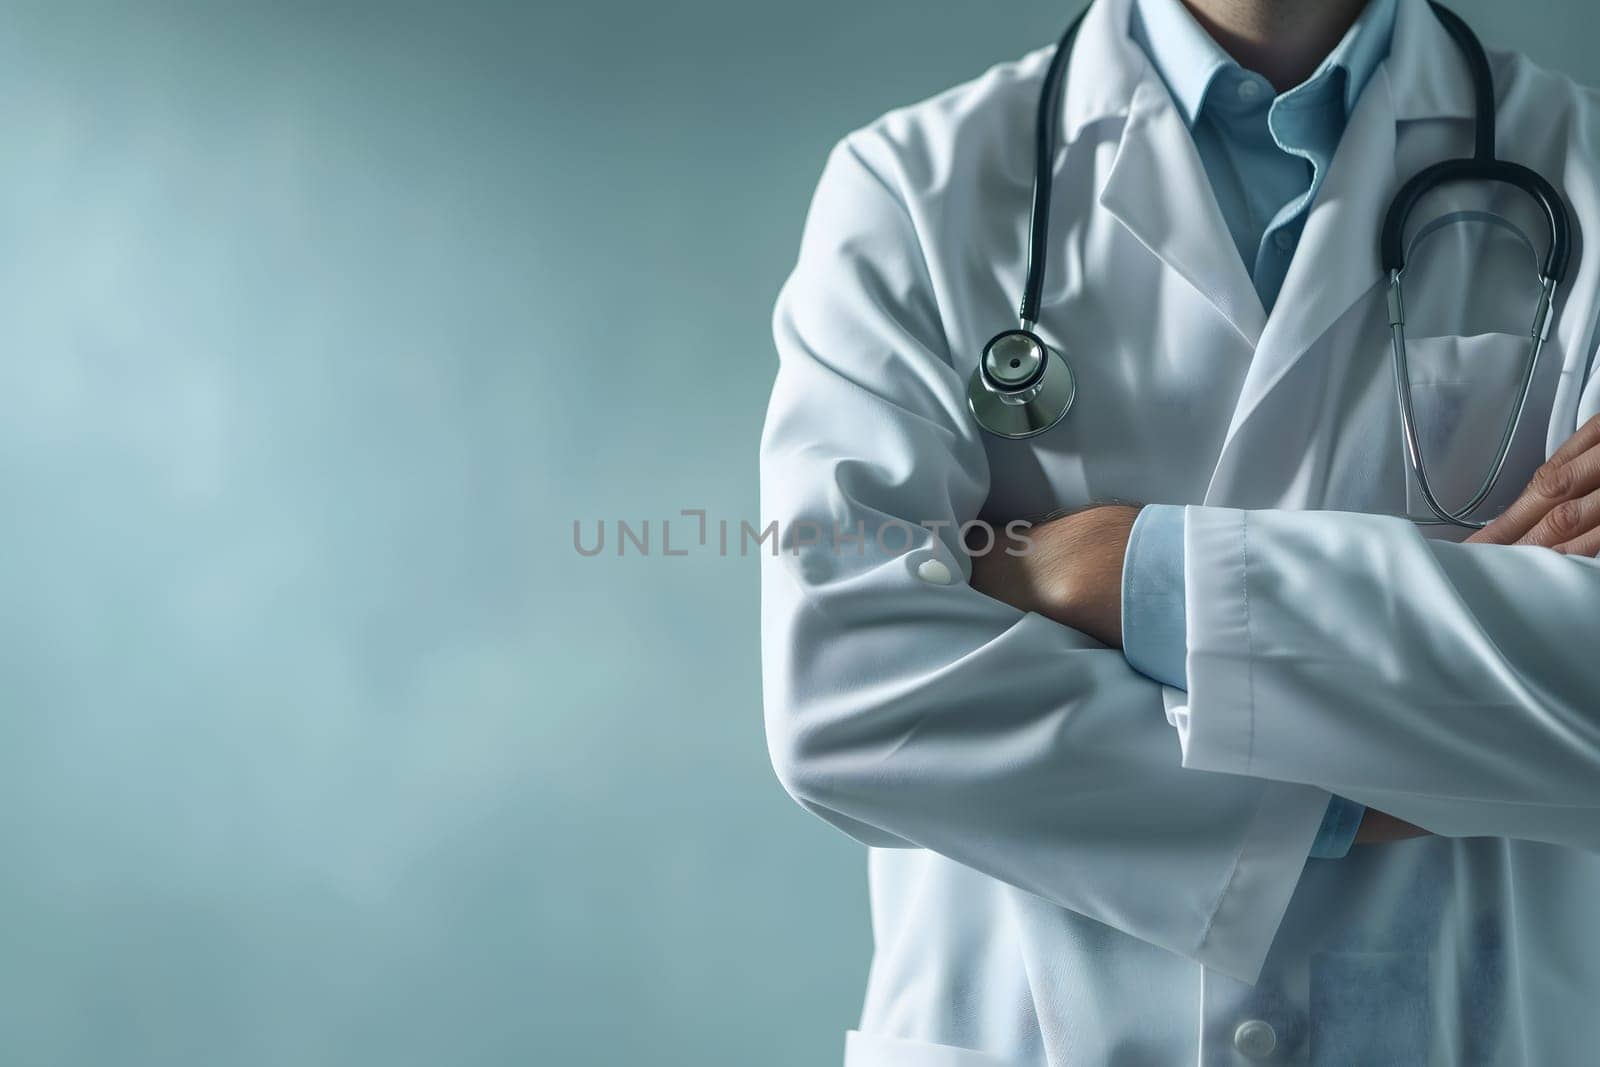 Abstract Medical Doctor, Symbolizing Compassion and Expertise asymmetrical composition with copy space. by z1b